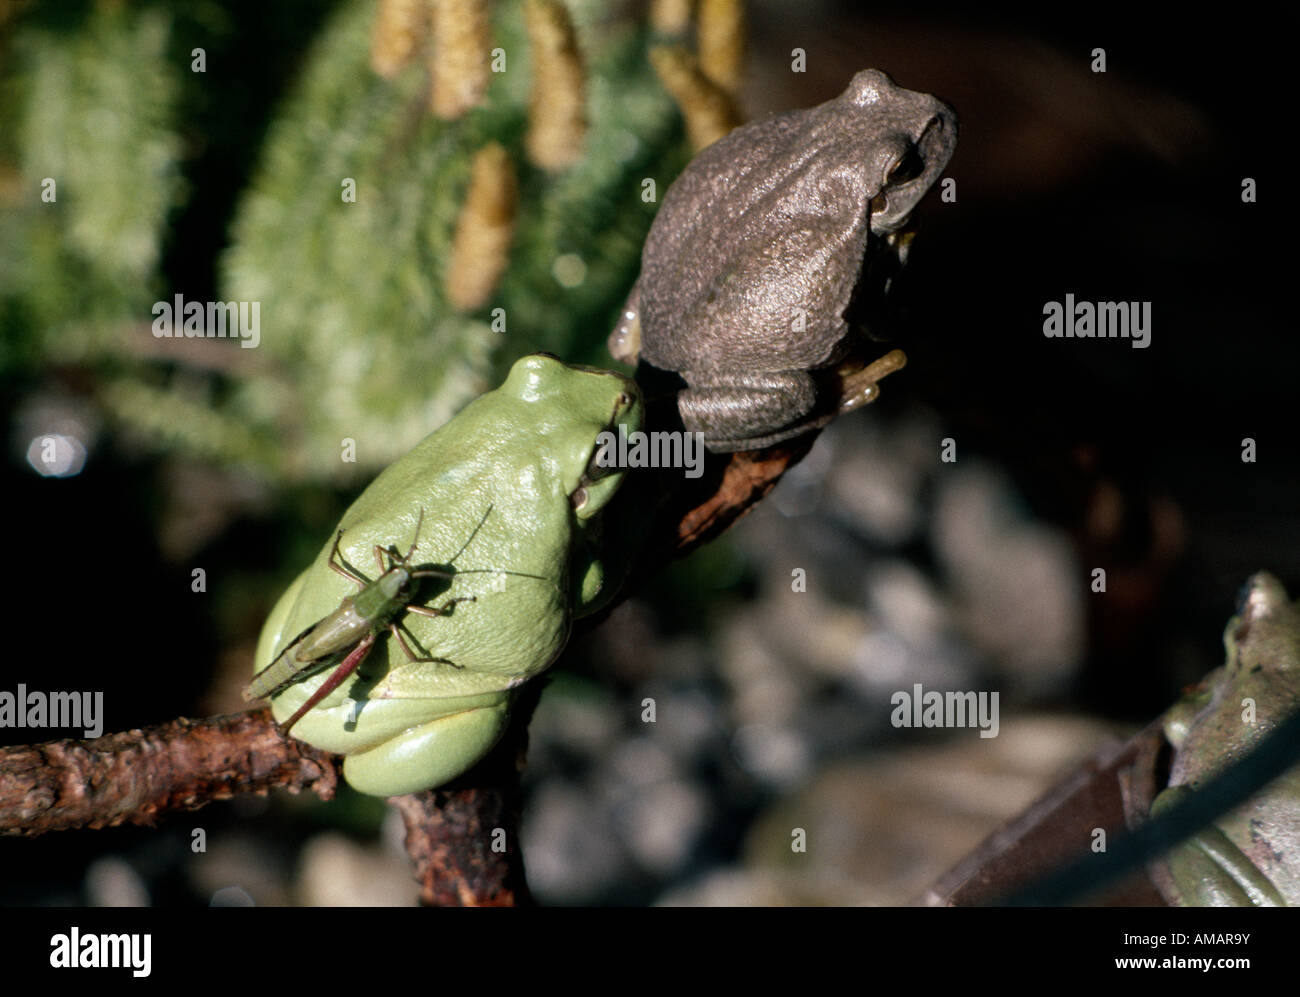 Two frogs and an insect perching on a tree branch Stock Photo